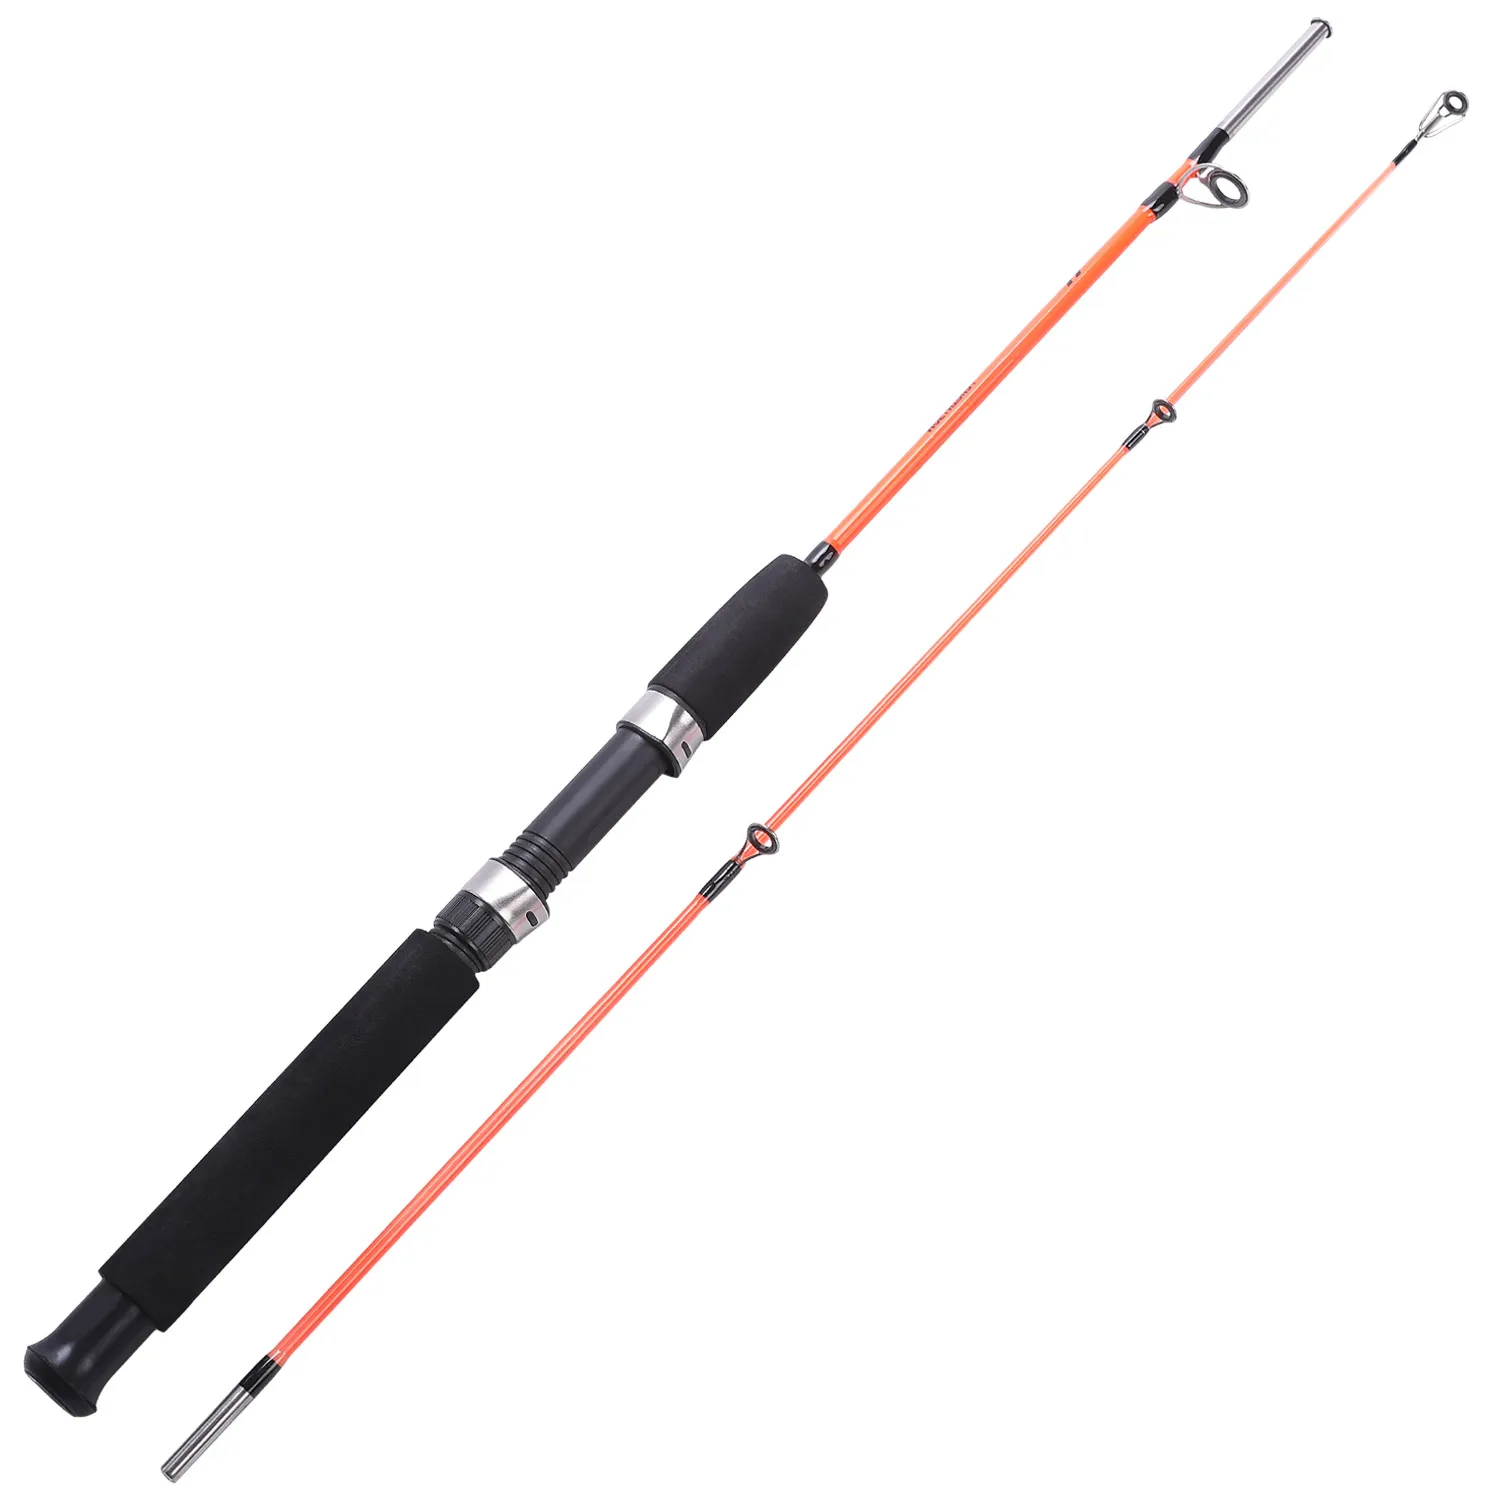 Spinning Lure Rod 2 Sections, Pesca Spinning Fishing Rods